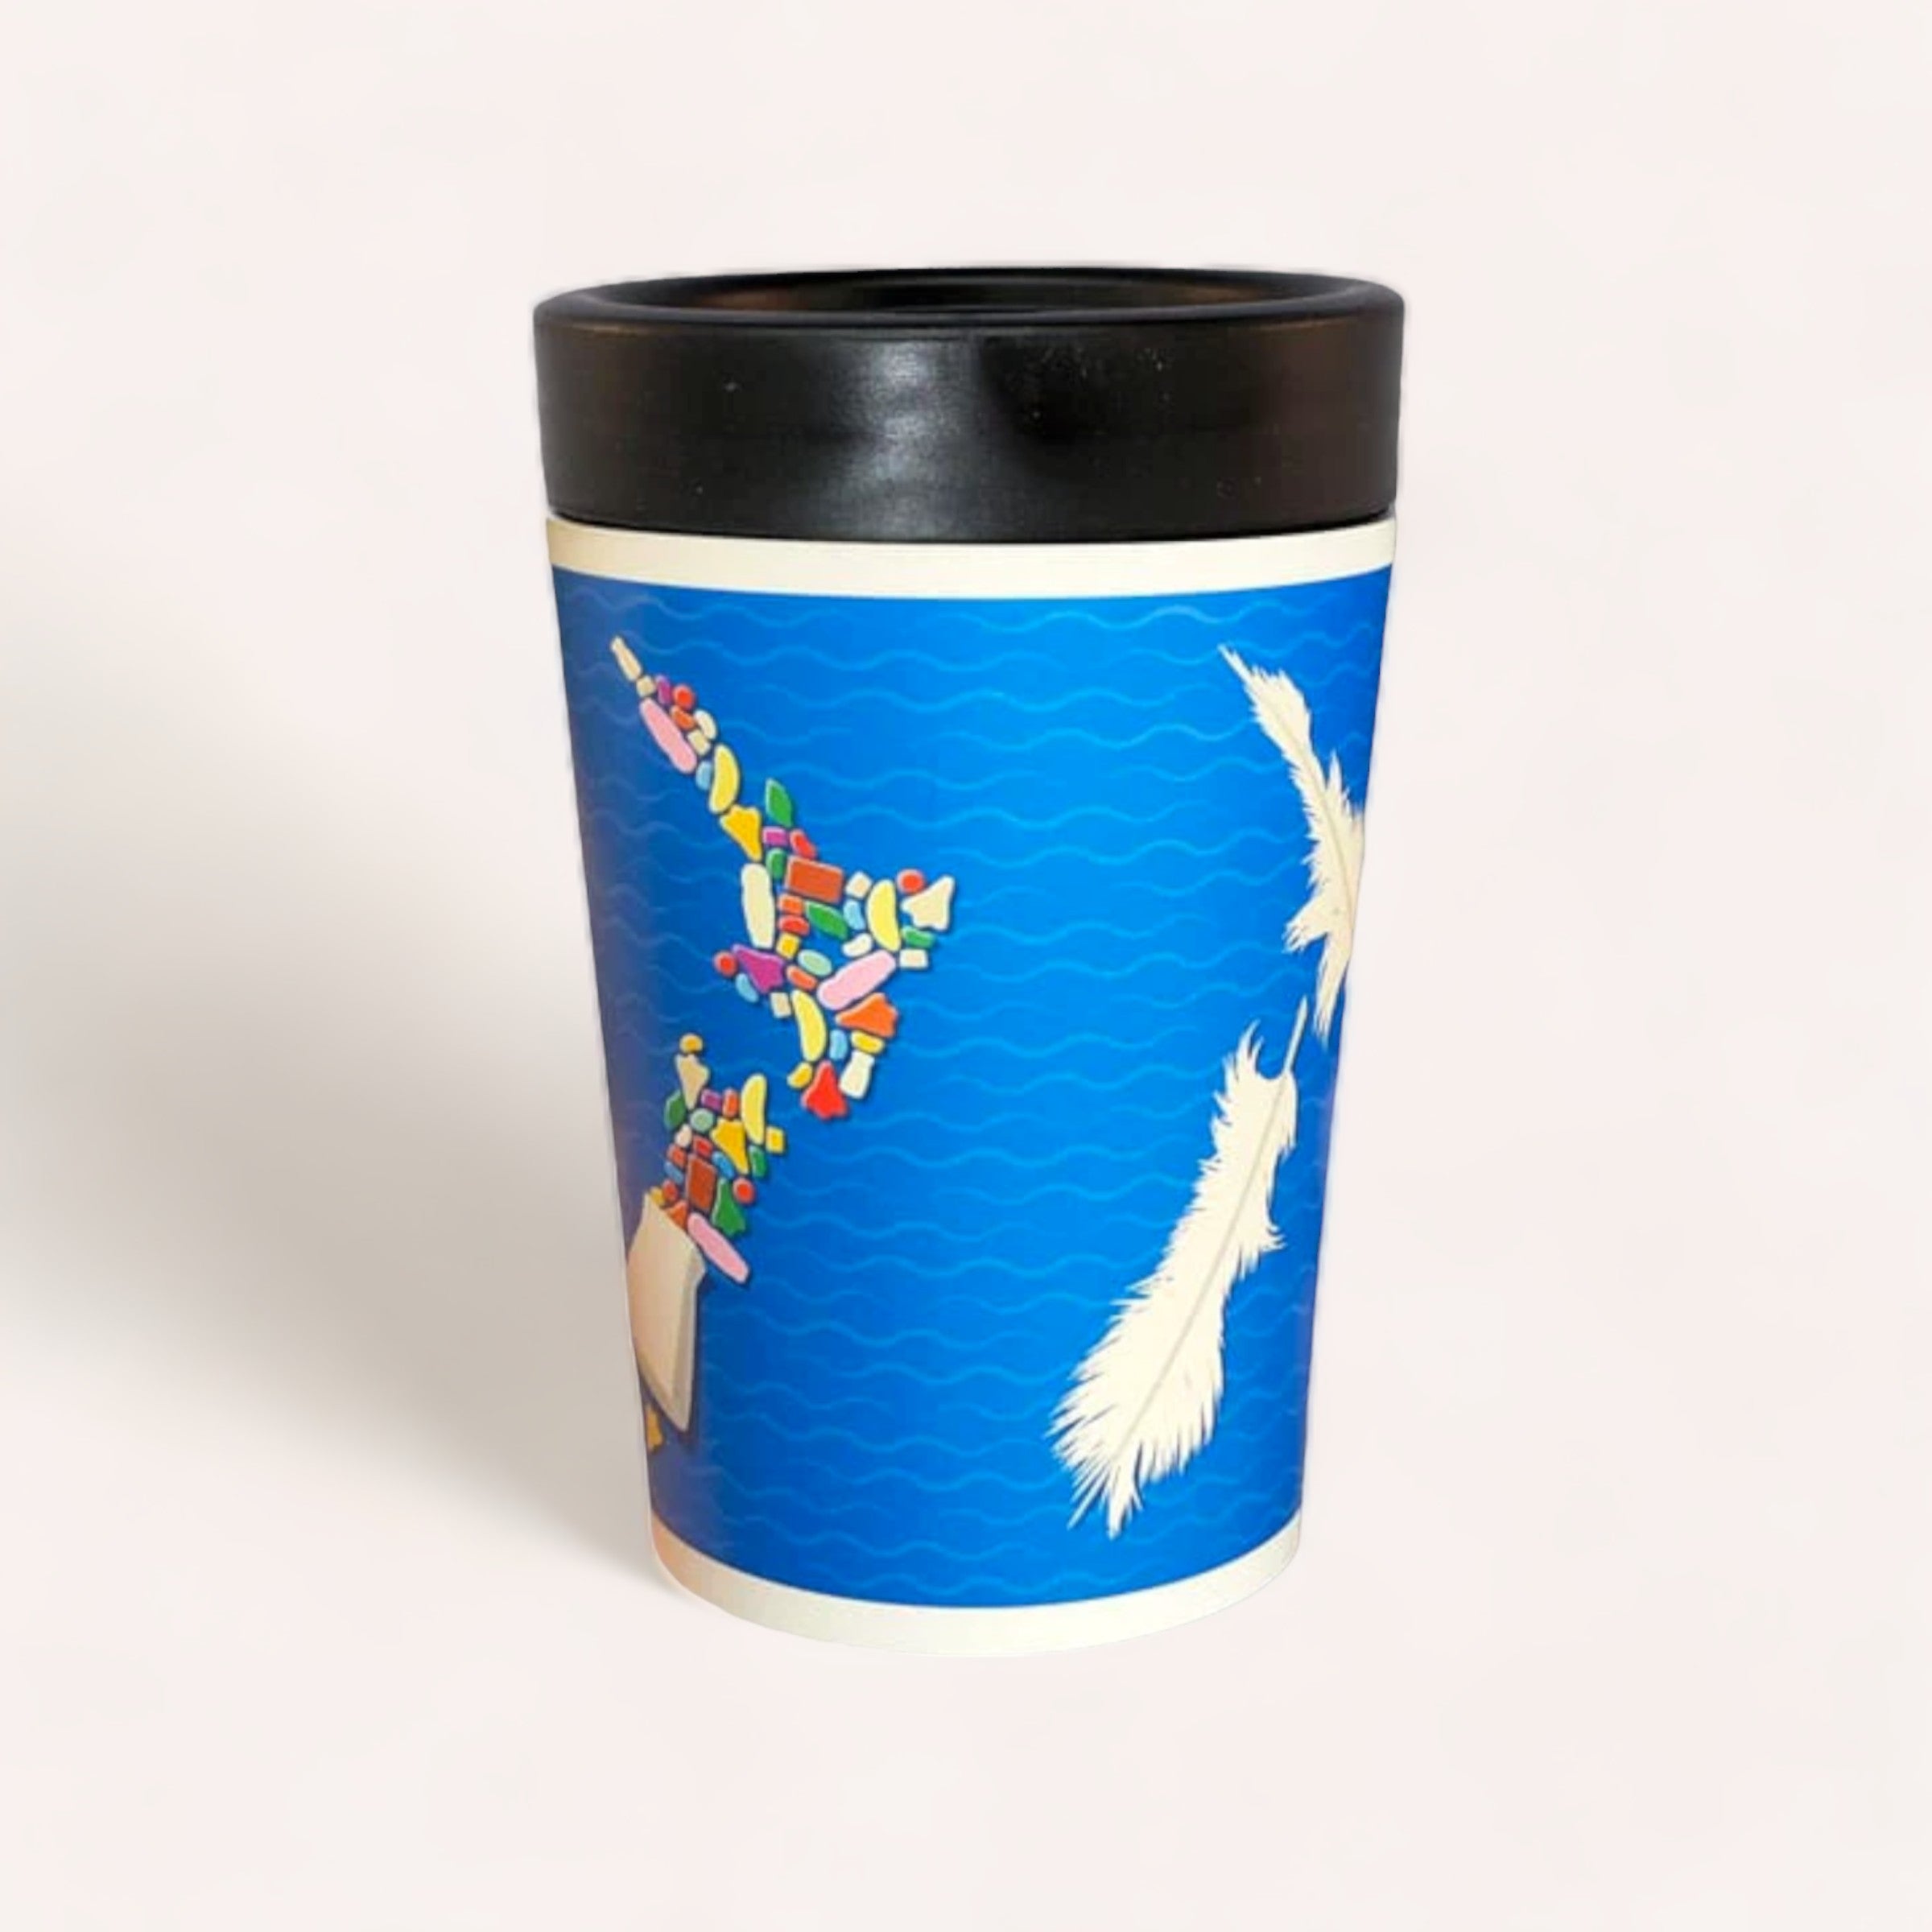 A Cuppacoffeecup New Zealand Coffee Mug with a unique blue, ocean-themed design featuring vibrant fish assembled from various colorful shapes, and delicate white feathers hovering against the rippling water pattern.